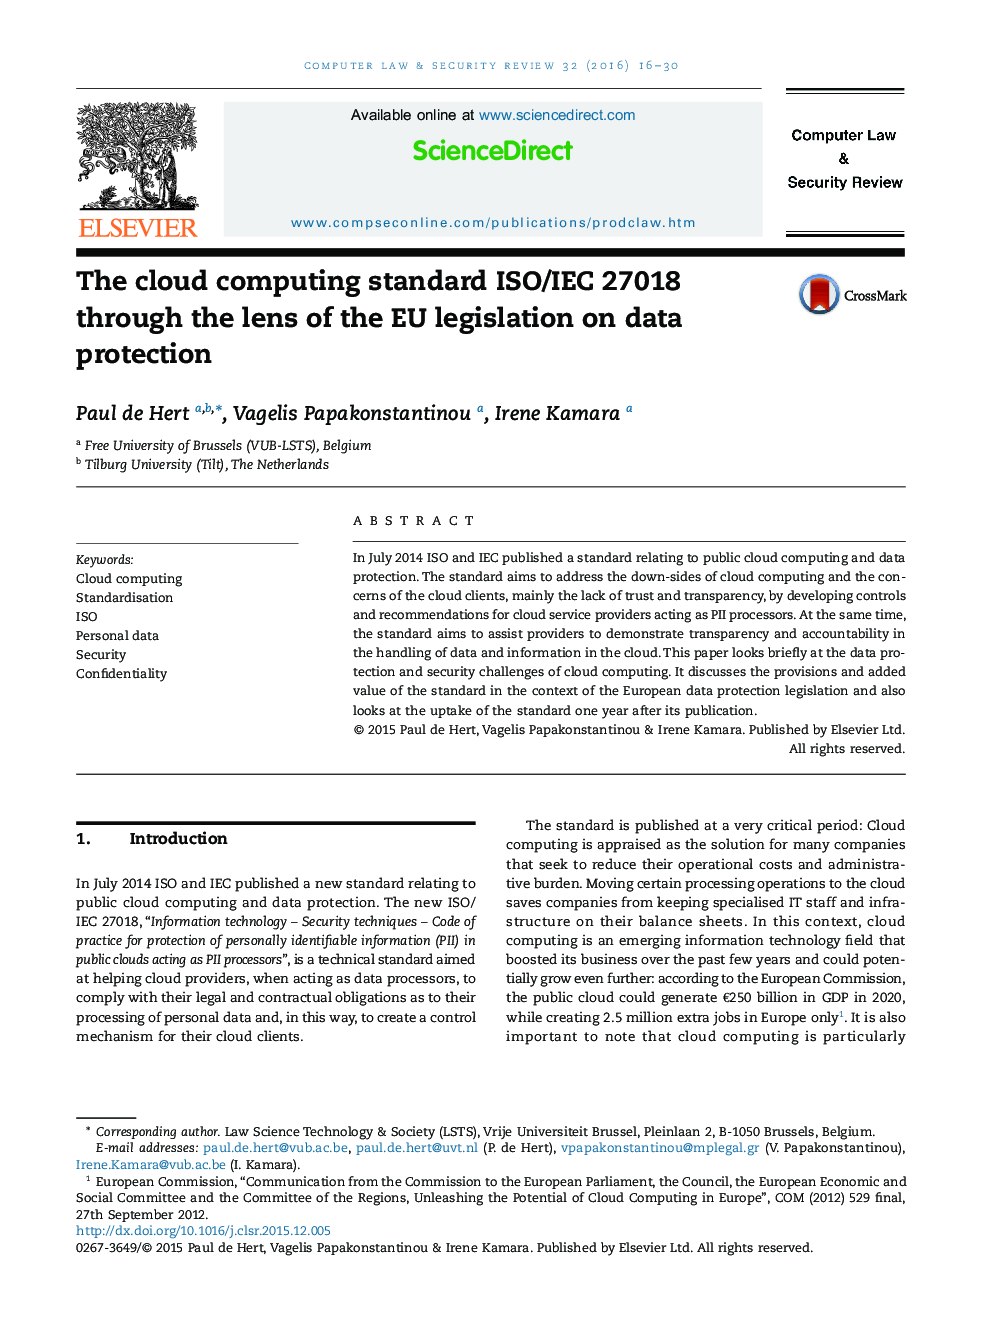 The cloud computing standard ISO/IEC 27018 through the lens of the EU legislation on data protection